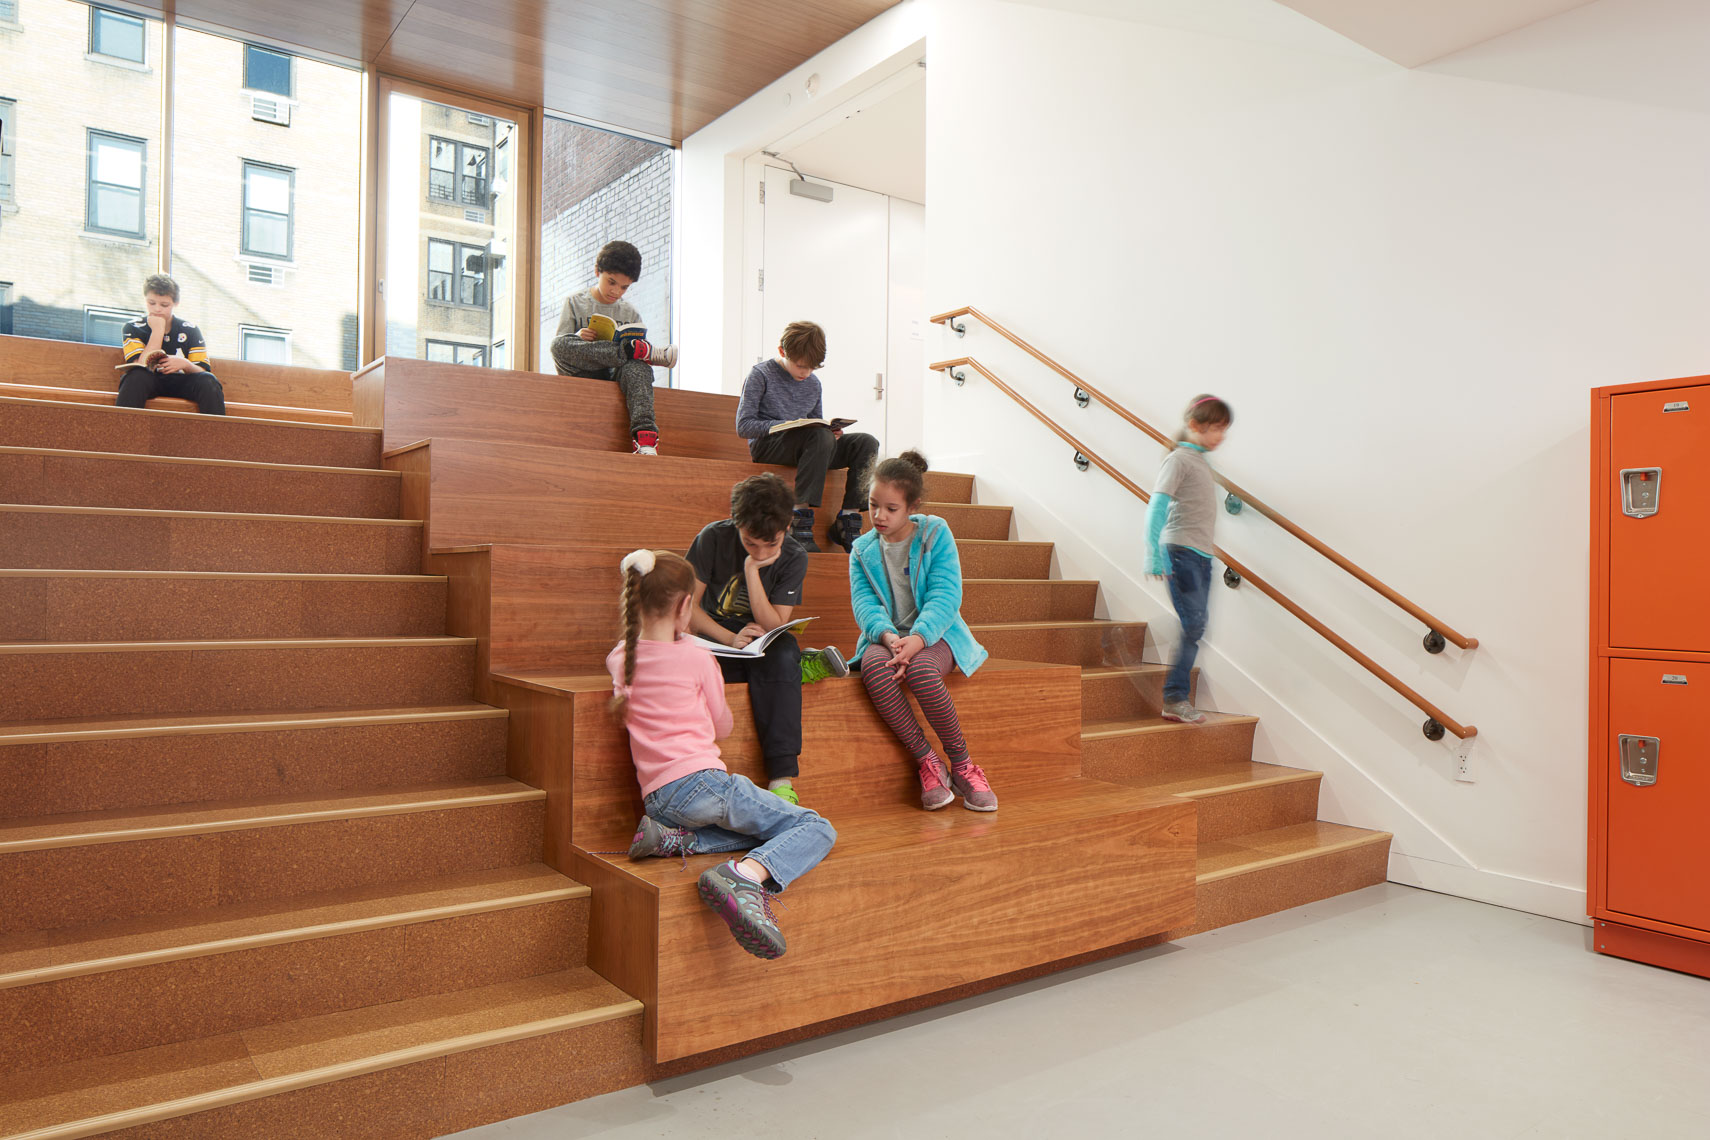 Students sit and work together on a staircase gallery